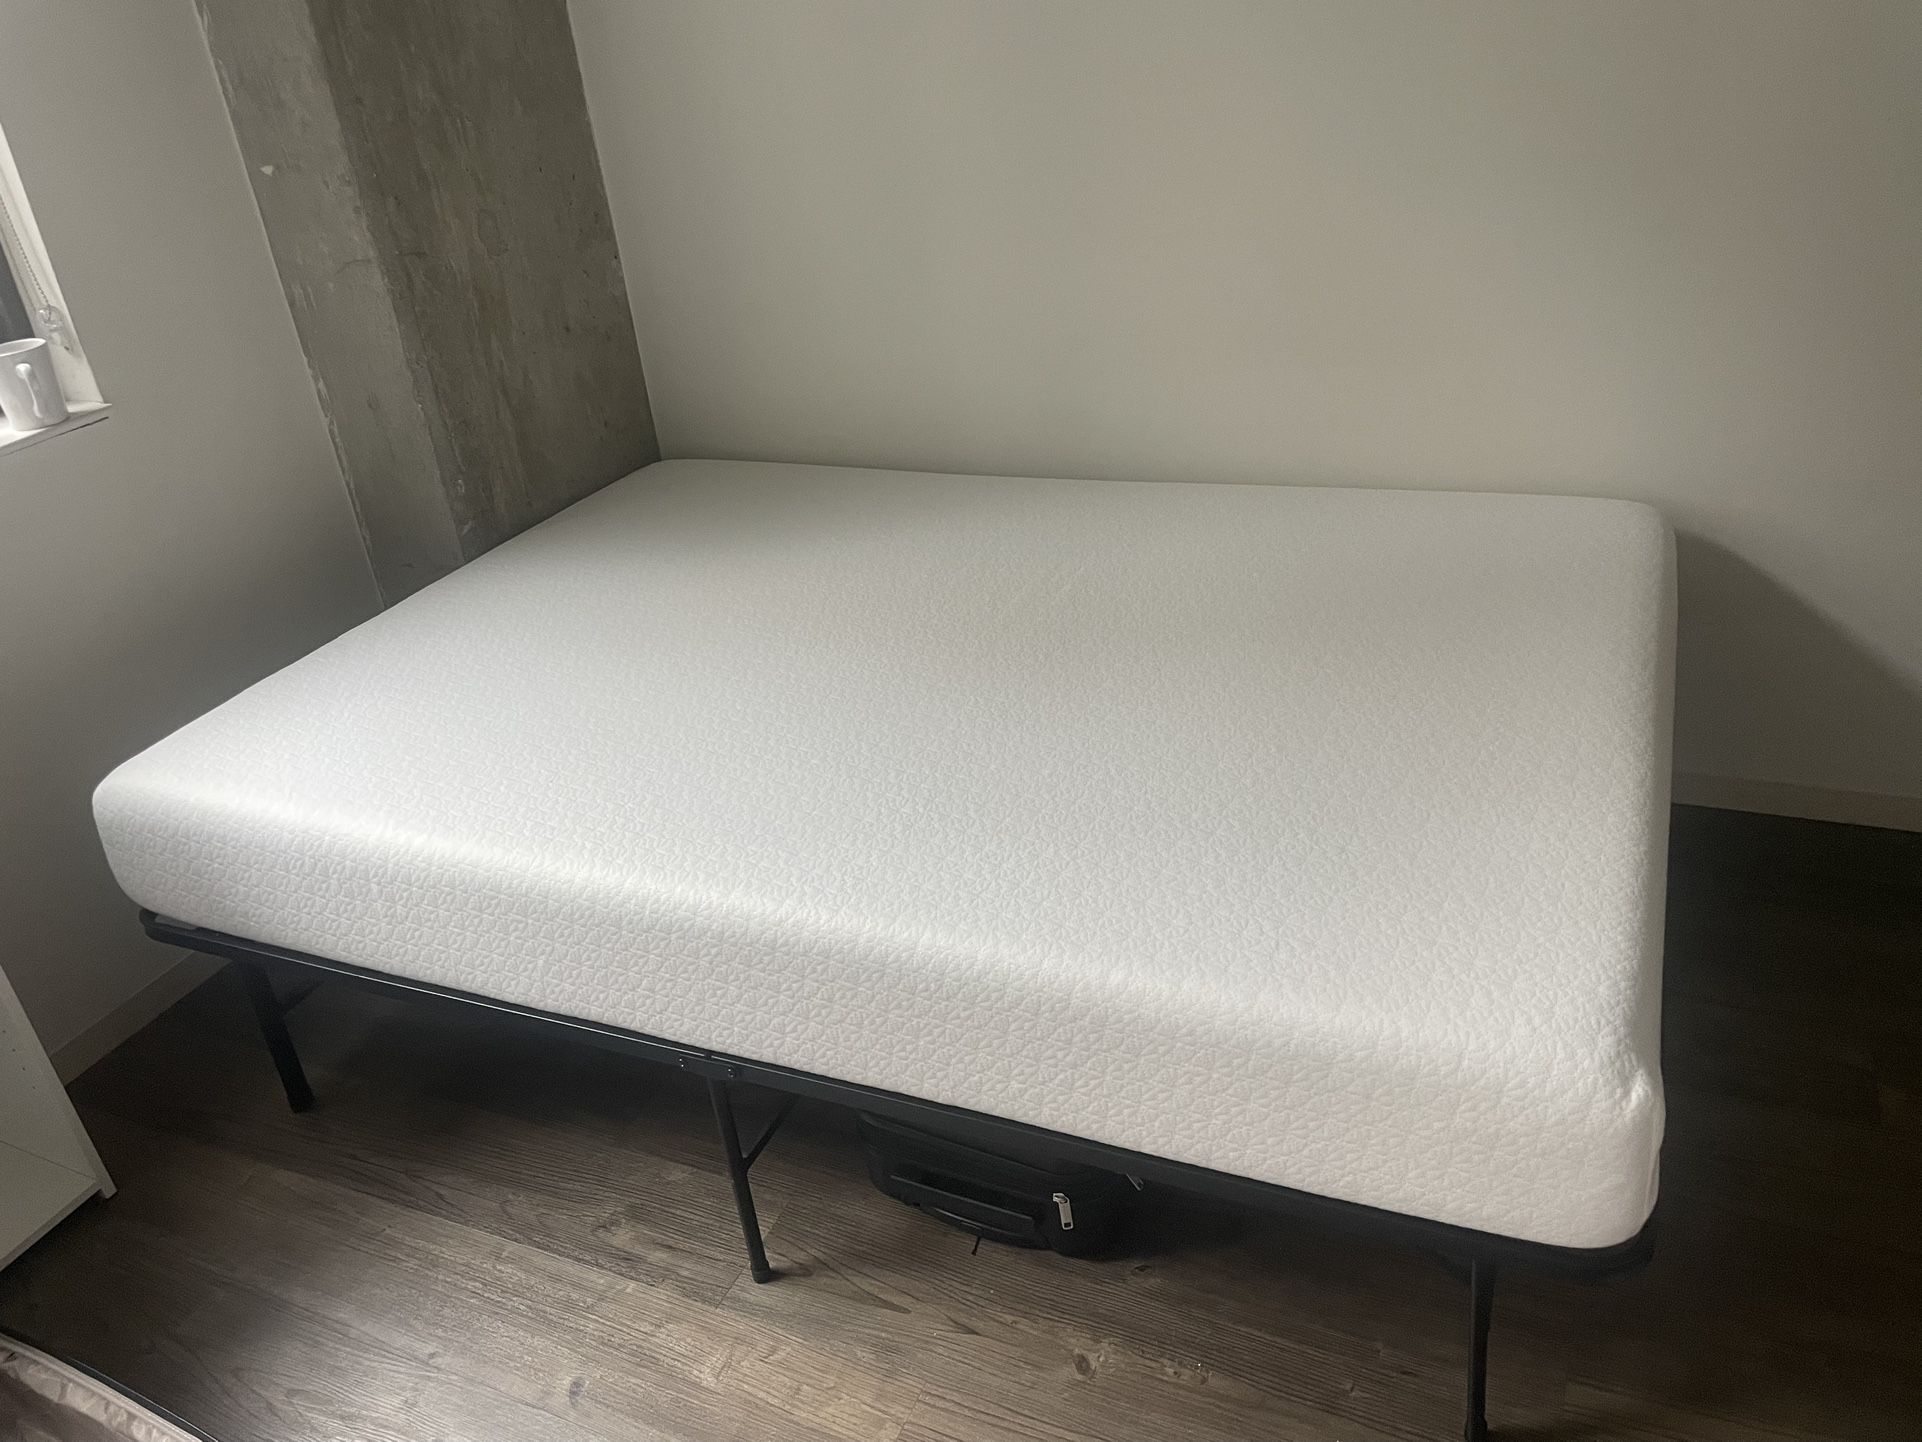 Pick Up Today 5/14 Mattress, Bed Frame And Pillows 